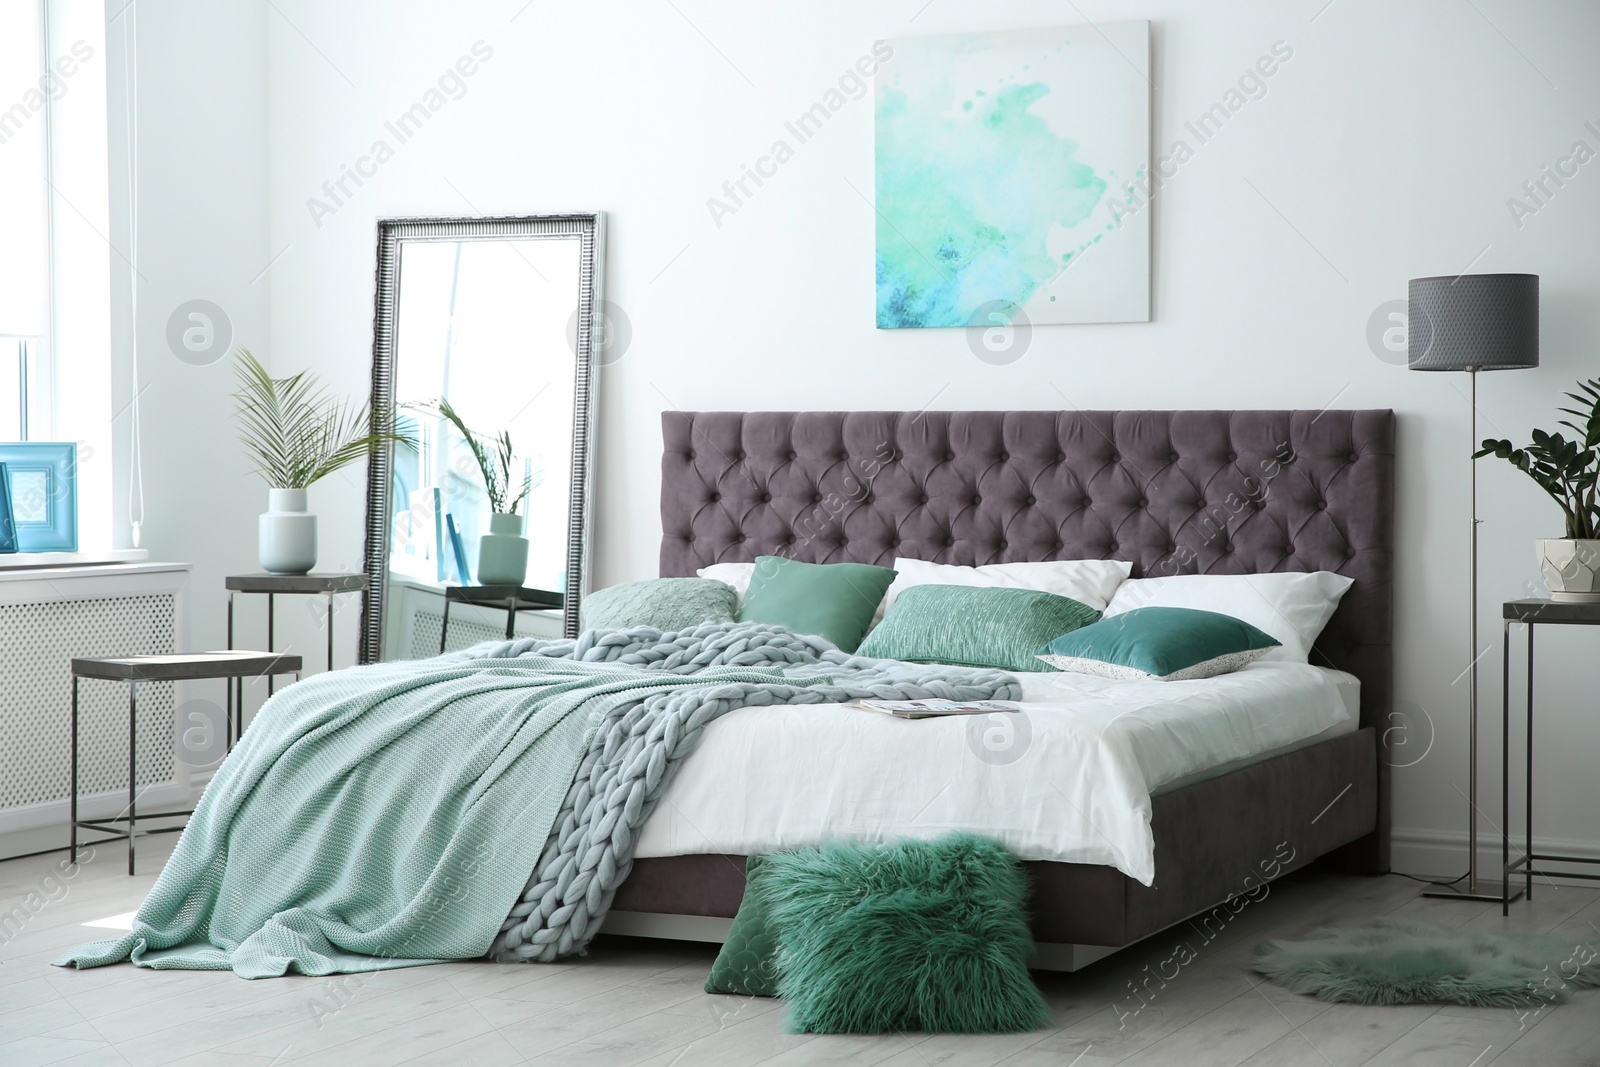 Photo of Stylish bedroom interior with mint decor elements